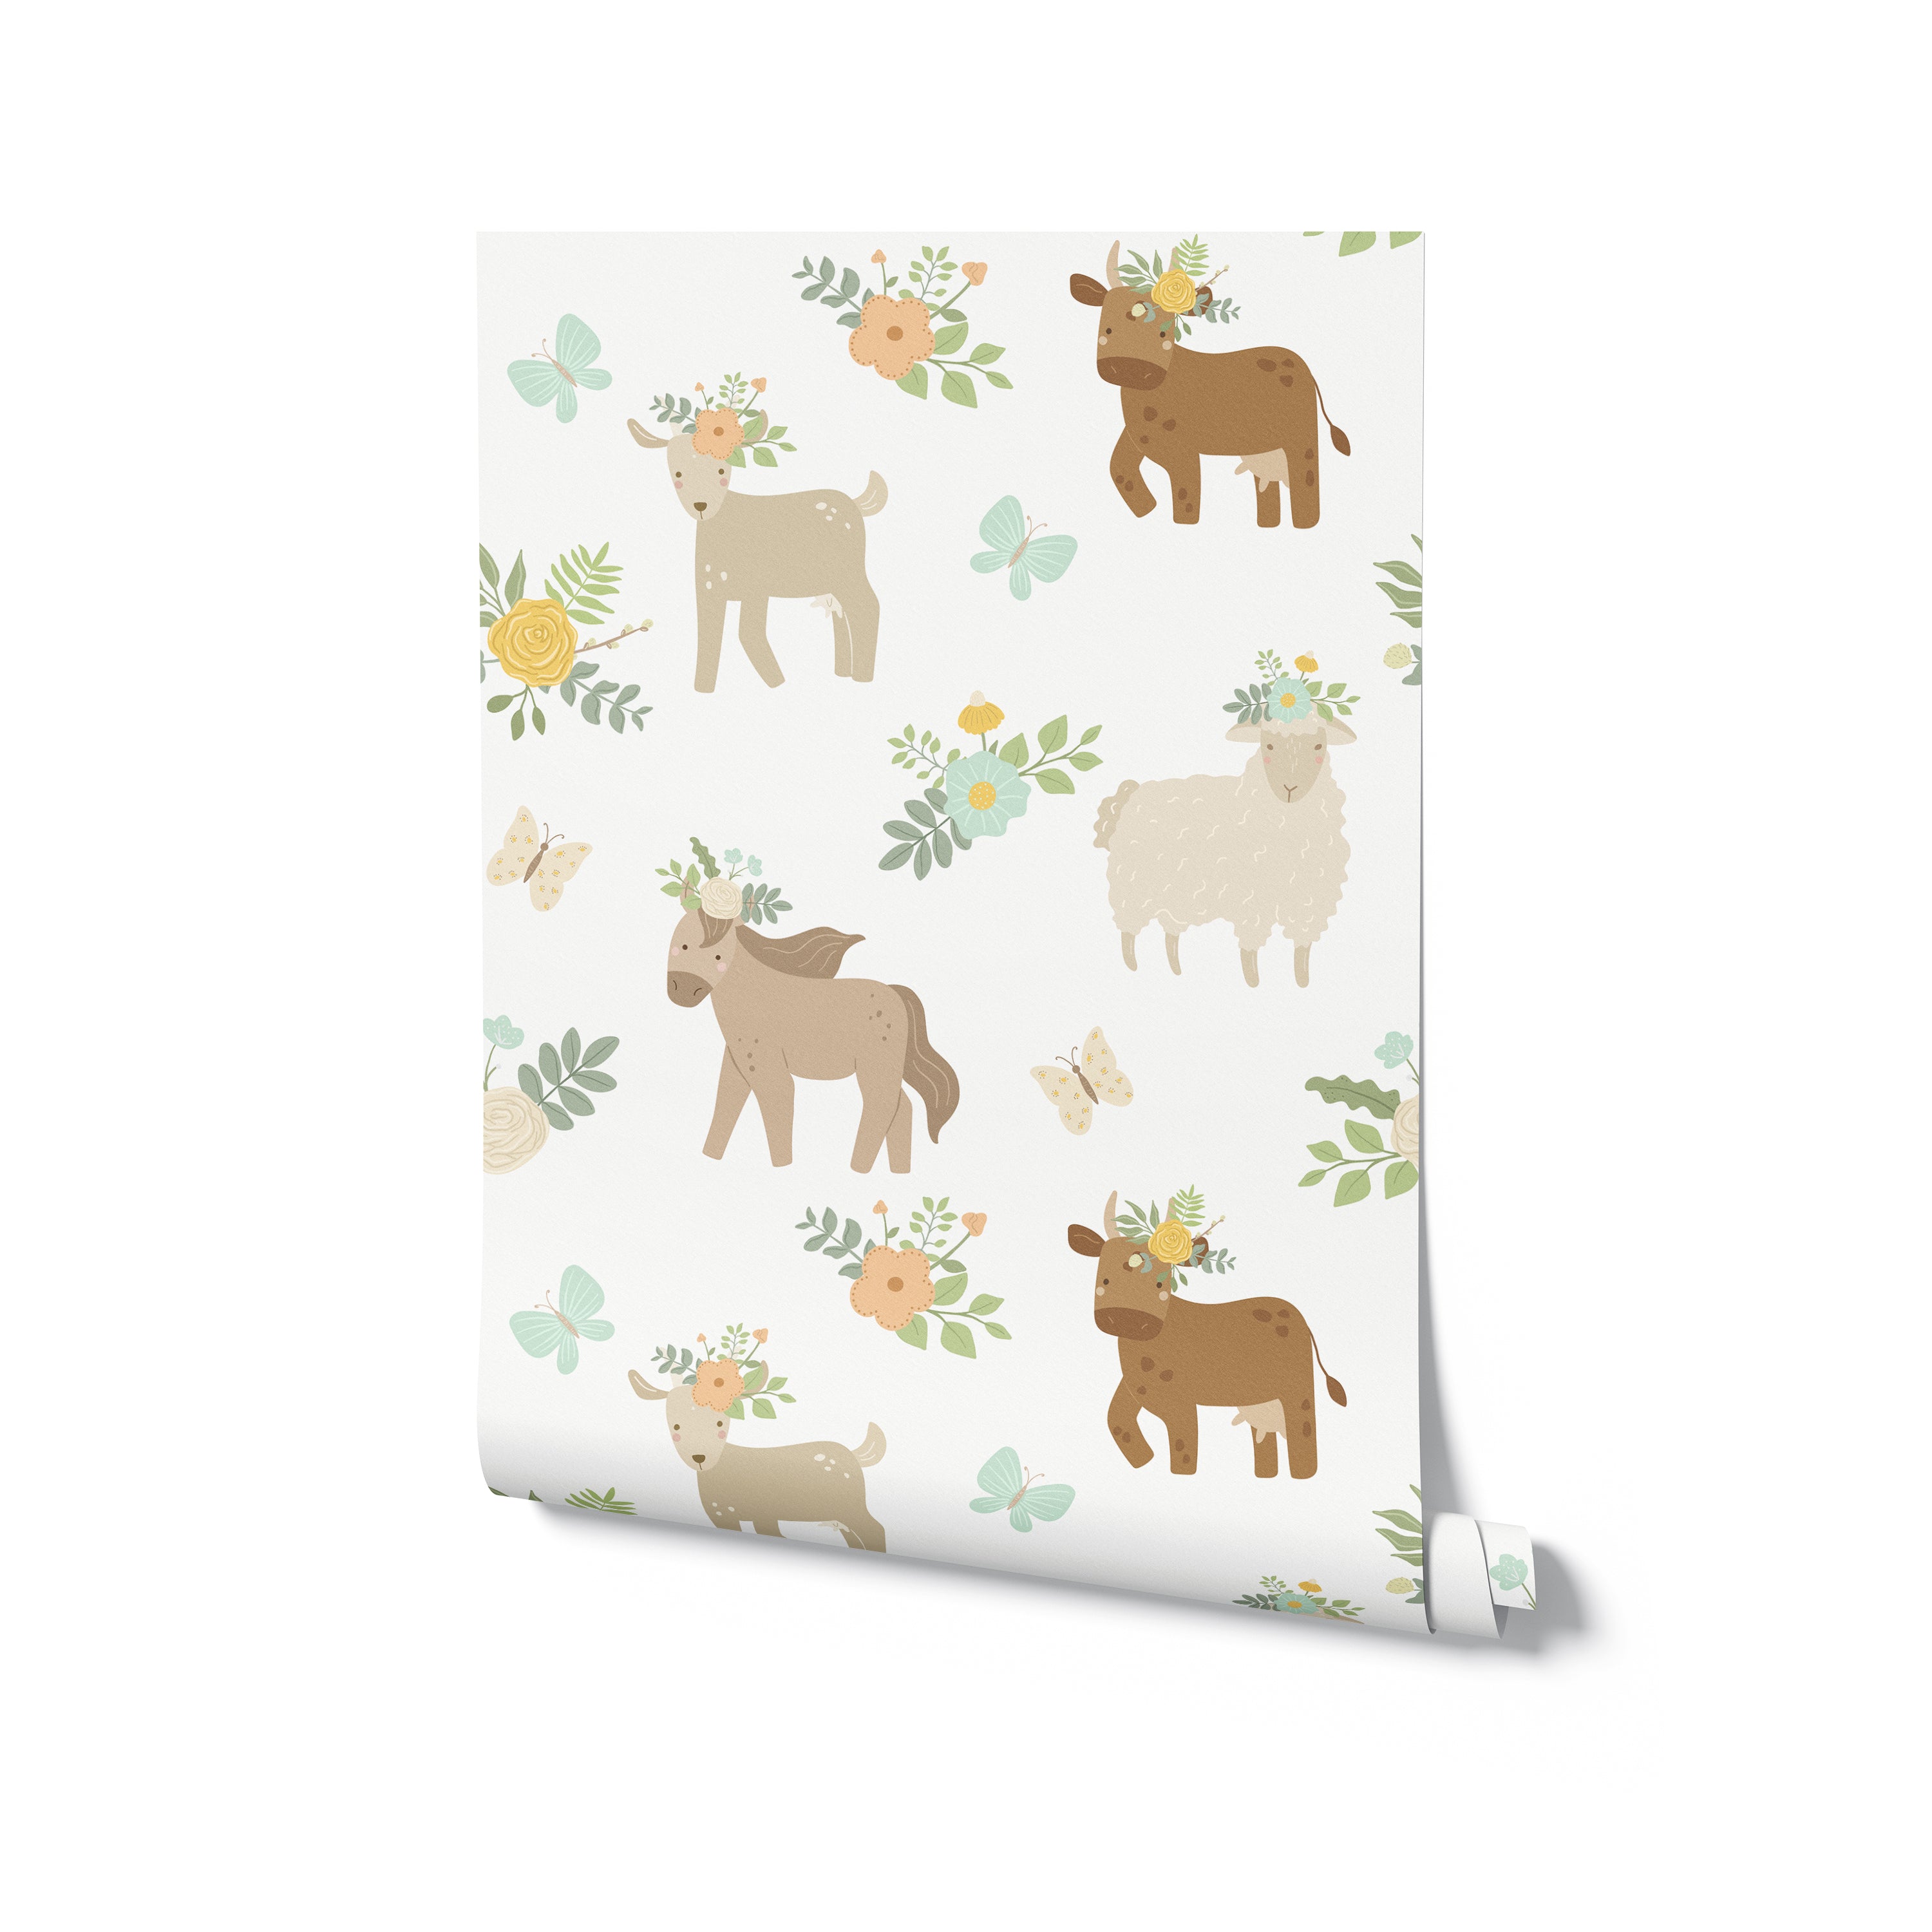 Roll of children’s wallpaper with a charming pattern of pastel farm animals, each adorned with floral wreaths, set against a backdrop of light-colored foliage and butterflies, perfect for adding a touch of spring to any child's room.